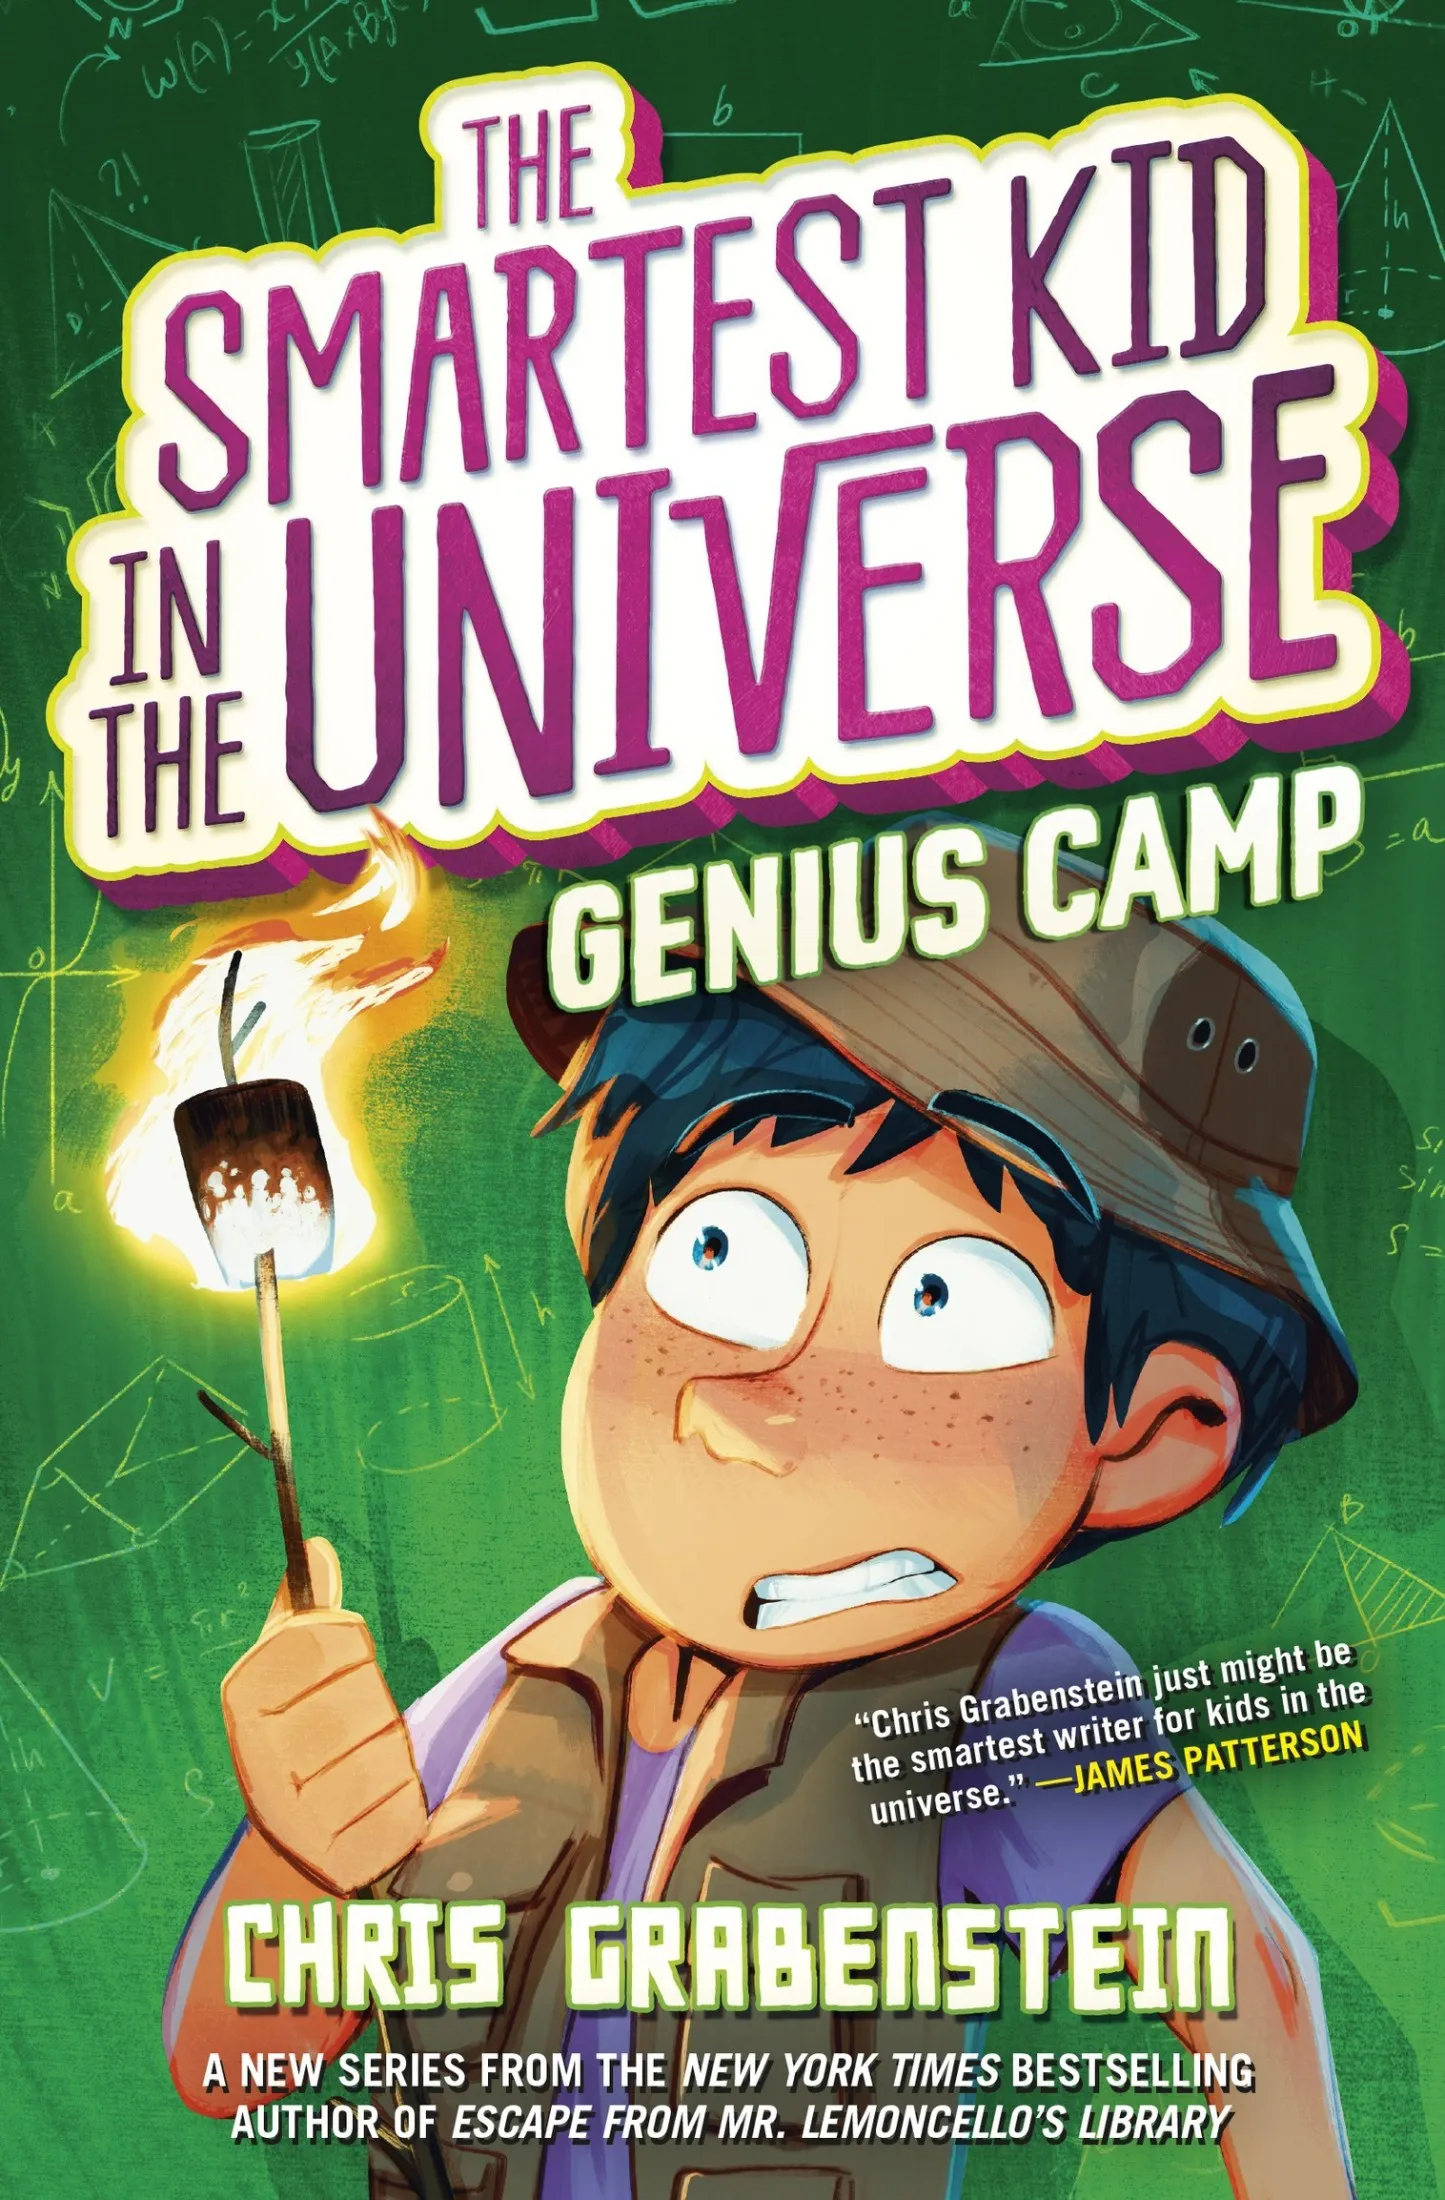 Genius Camp (The Smartest Kid in the Universe #2)